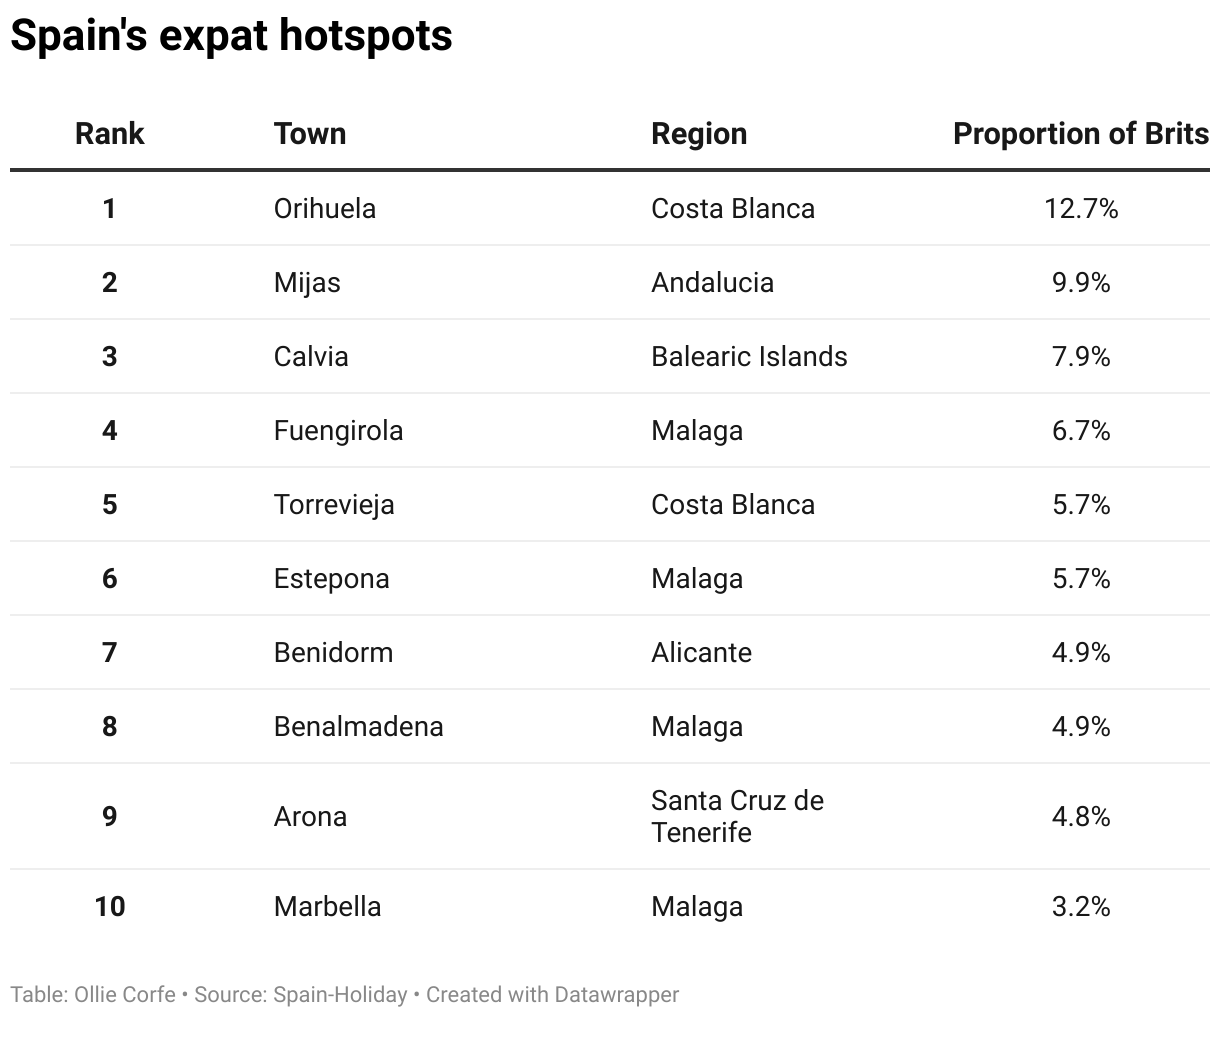 Table of top expat hotspots in Spain.